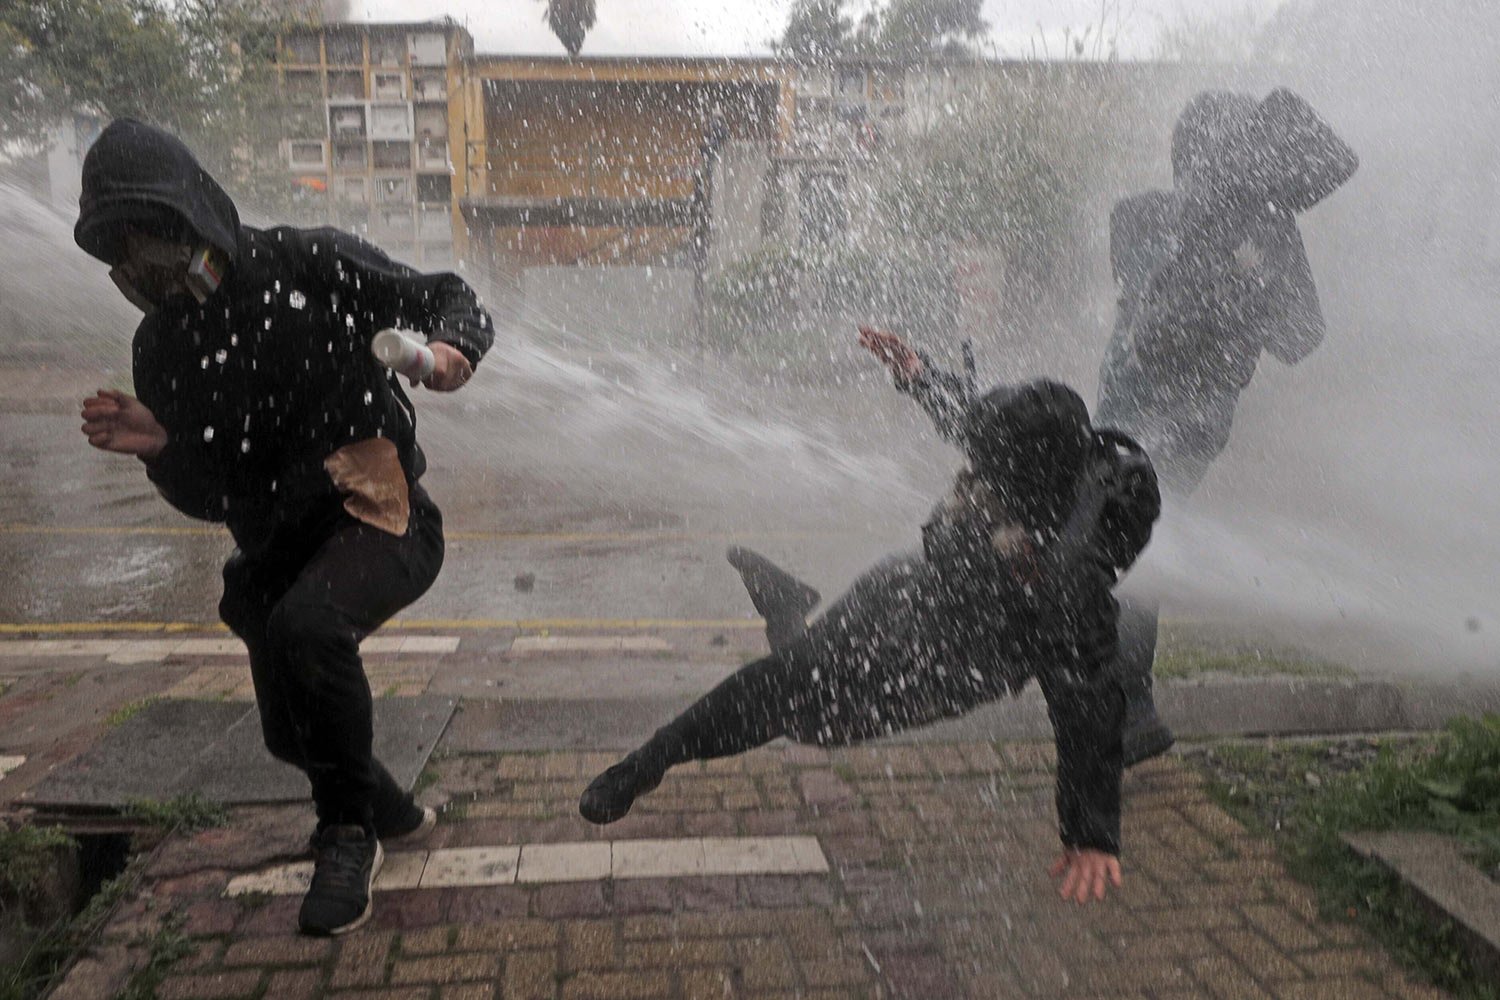  Protesters are hit by a police water cannon during clashes at a march marking the 50th anniversary of a military coup led by Gen. Augusto Pinochet in Santiago, Chile, Sept. 10, 2023. (AP Photo/Luis Hidalgo) 